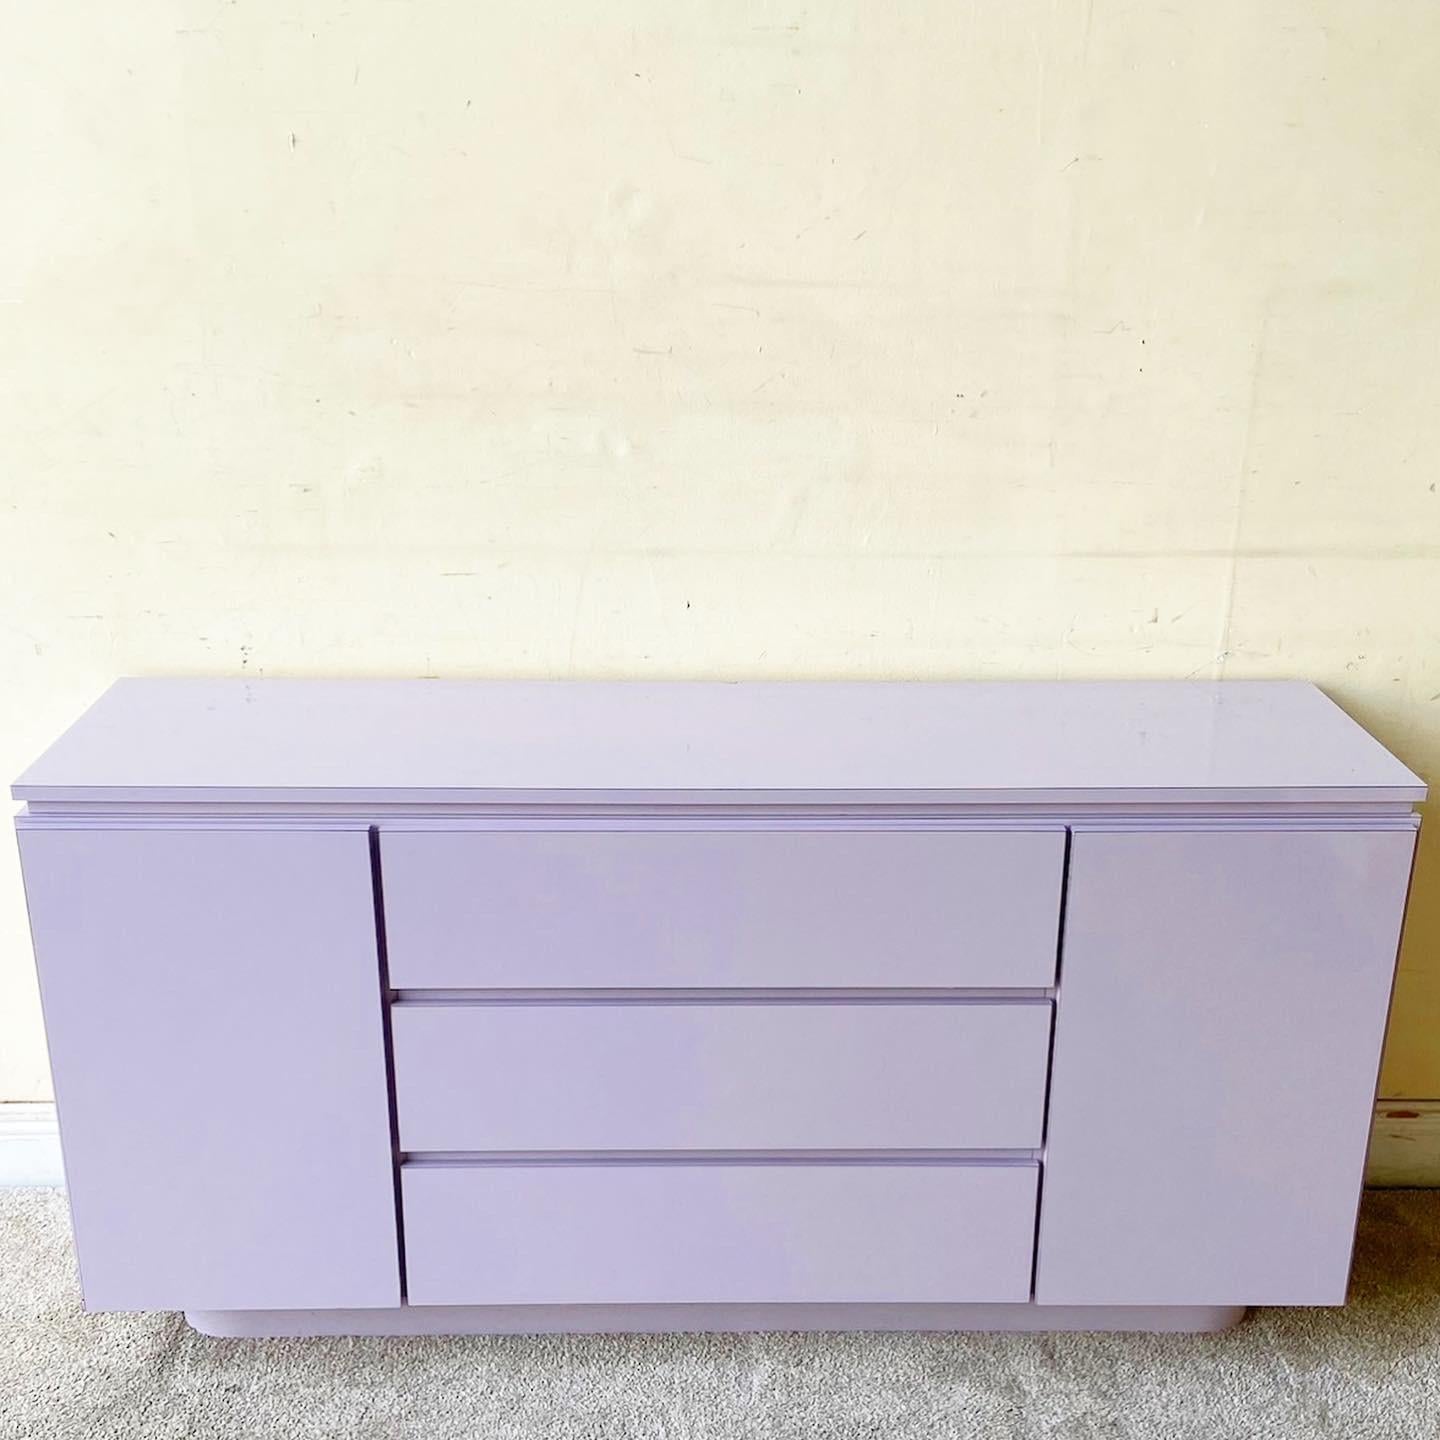 Amazing vintage Postmodern credenza. Features a lavender lacquer laminate with 3 large spacious drawers and town cabinet doors on each side.